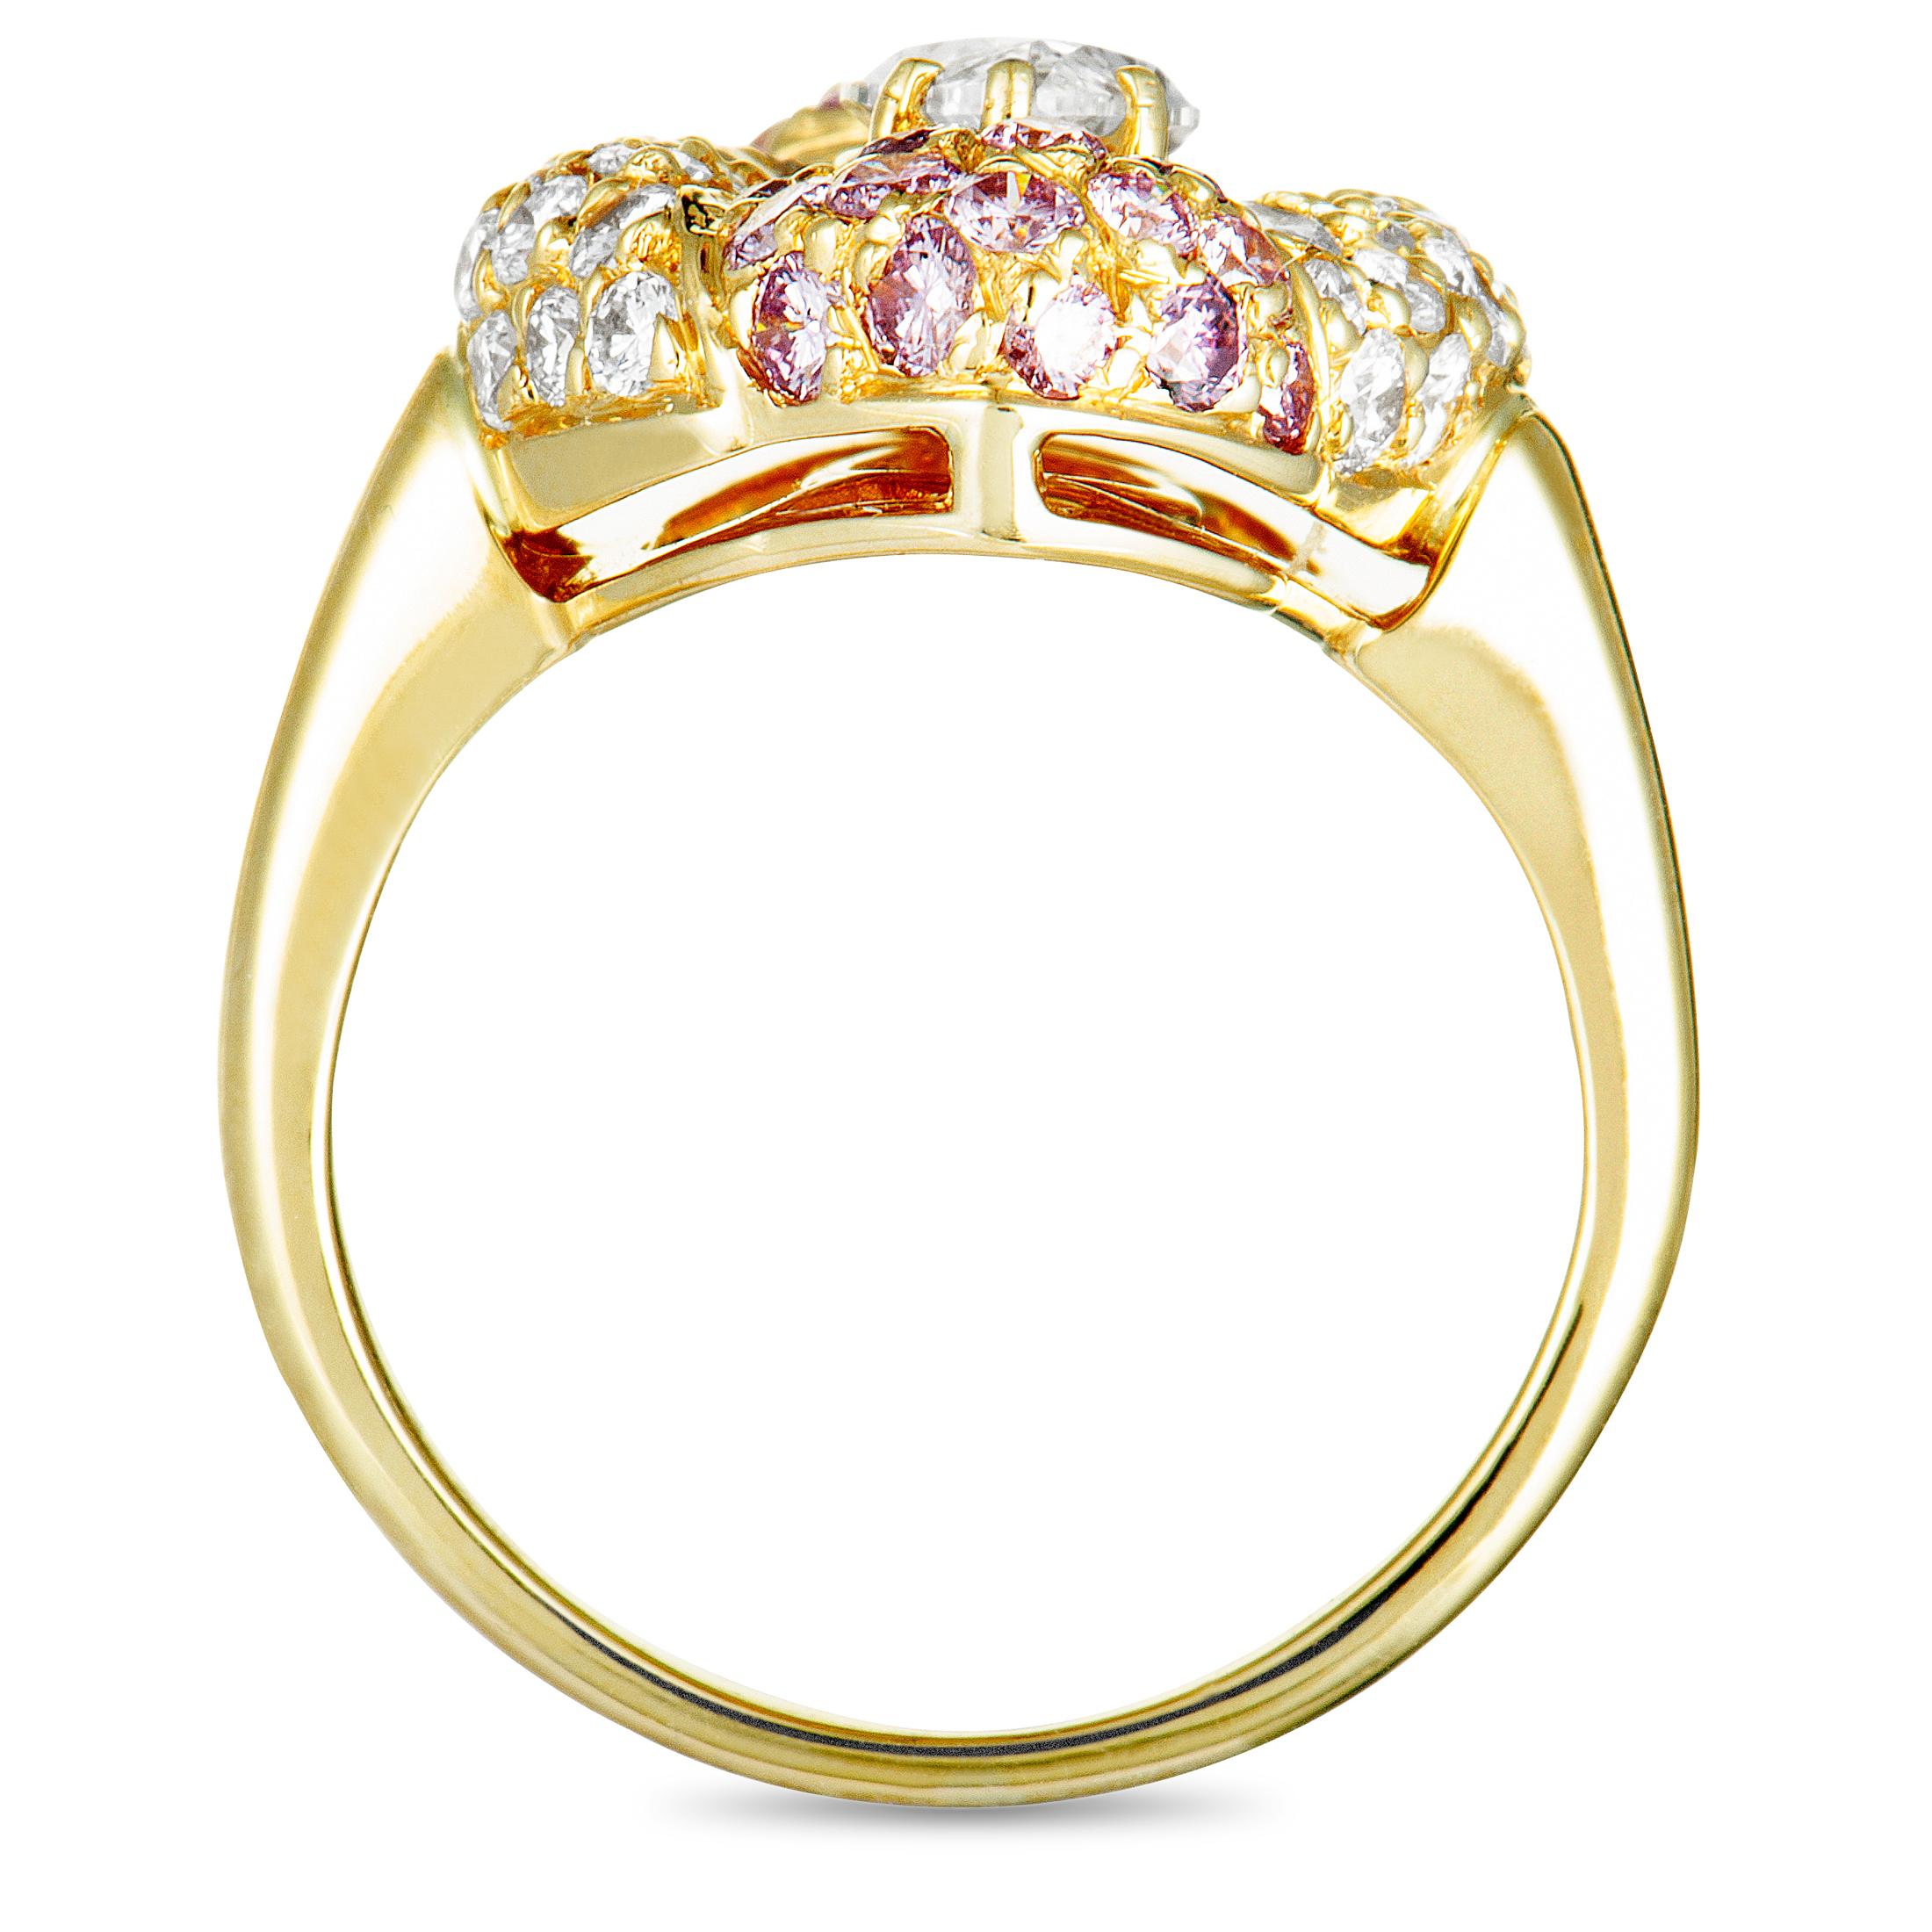 Featuring an exceptionally classy design that is beautifully presented in luxe 18K yellow gold and lavishly topped off with a plethora of resplendent diamonds, this majestic ring from Graff offers an incredibly extravagant appearance. The center